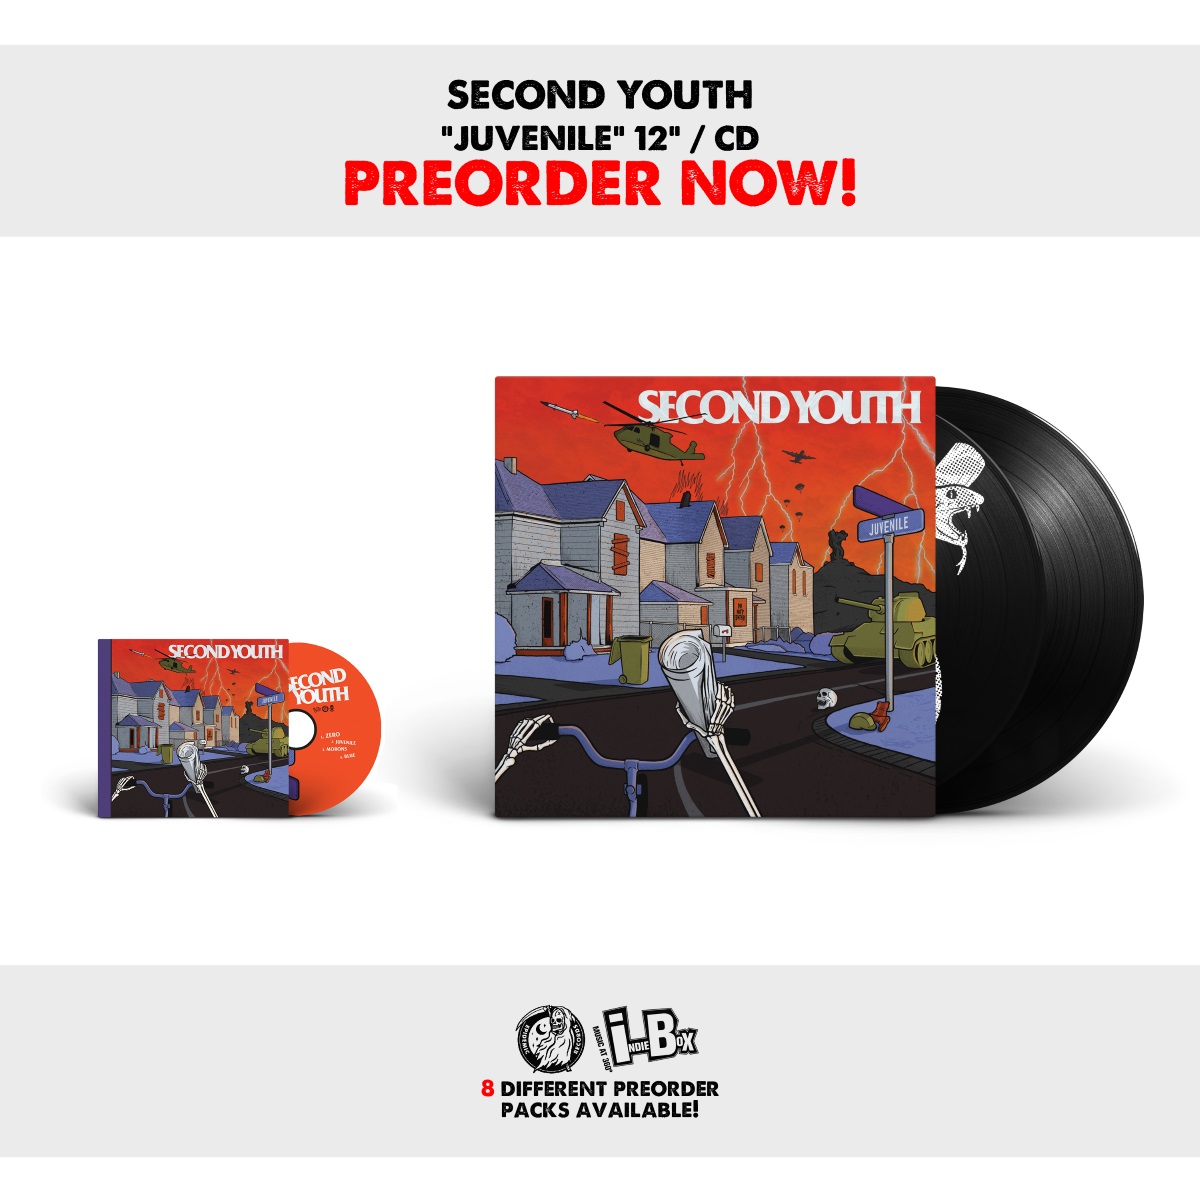 SECOND YOUTH promo